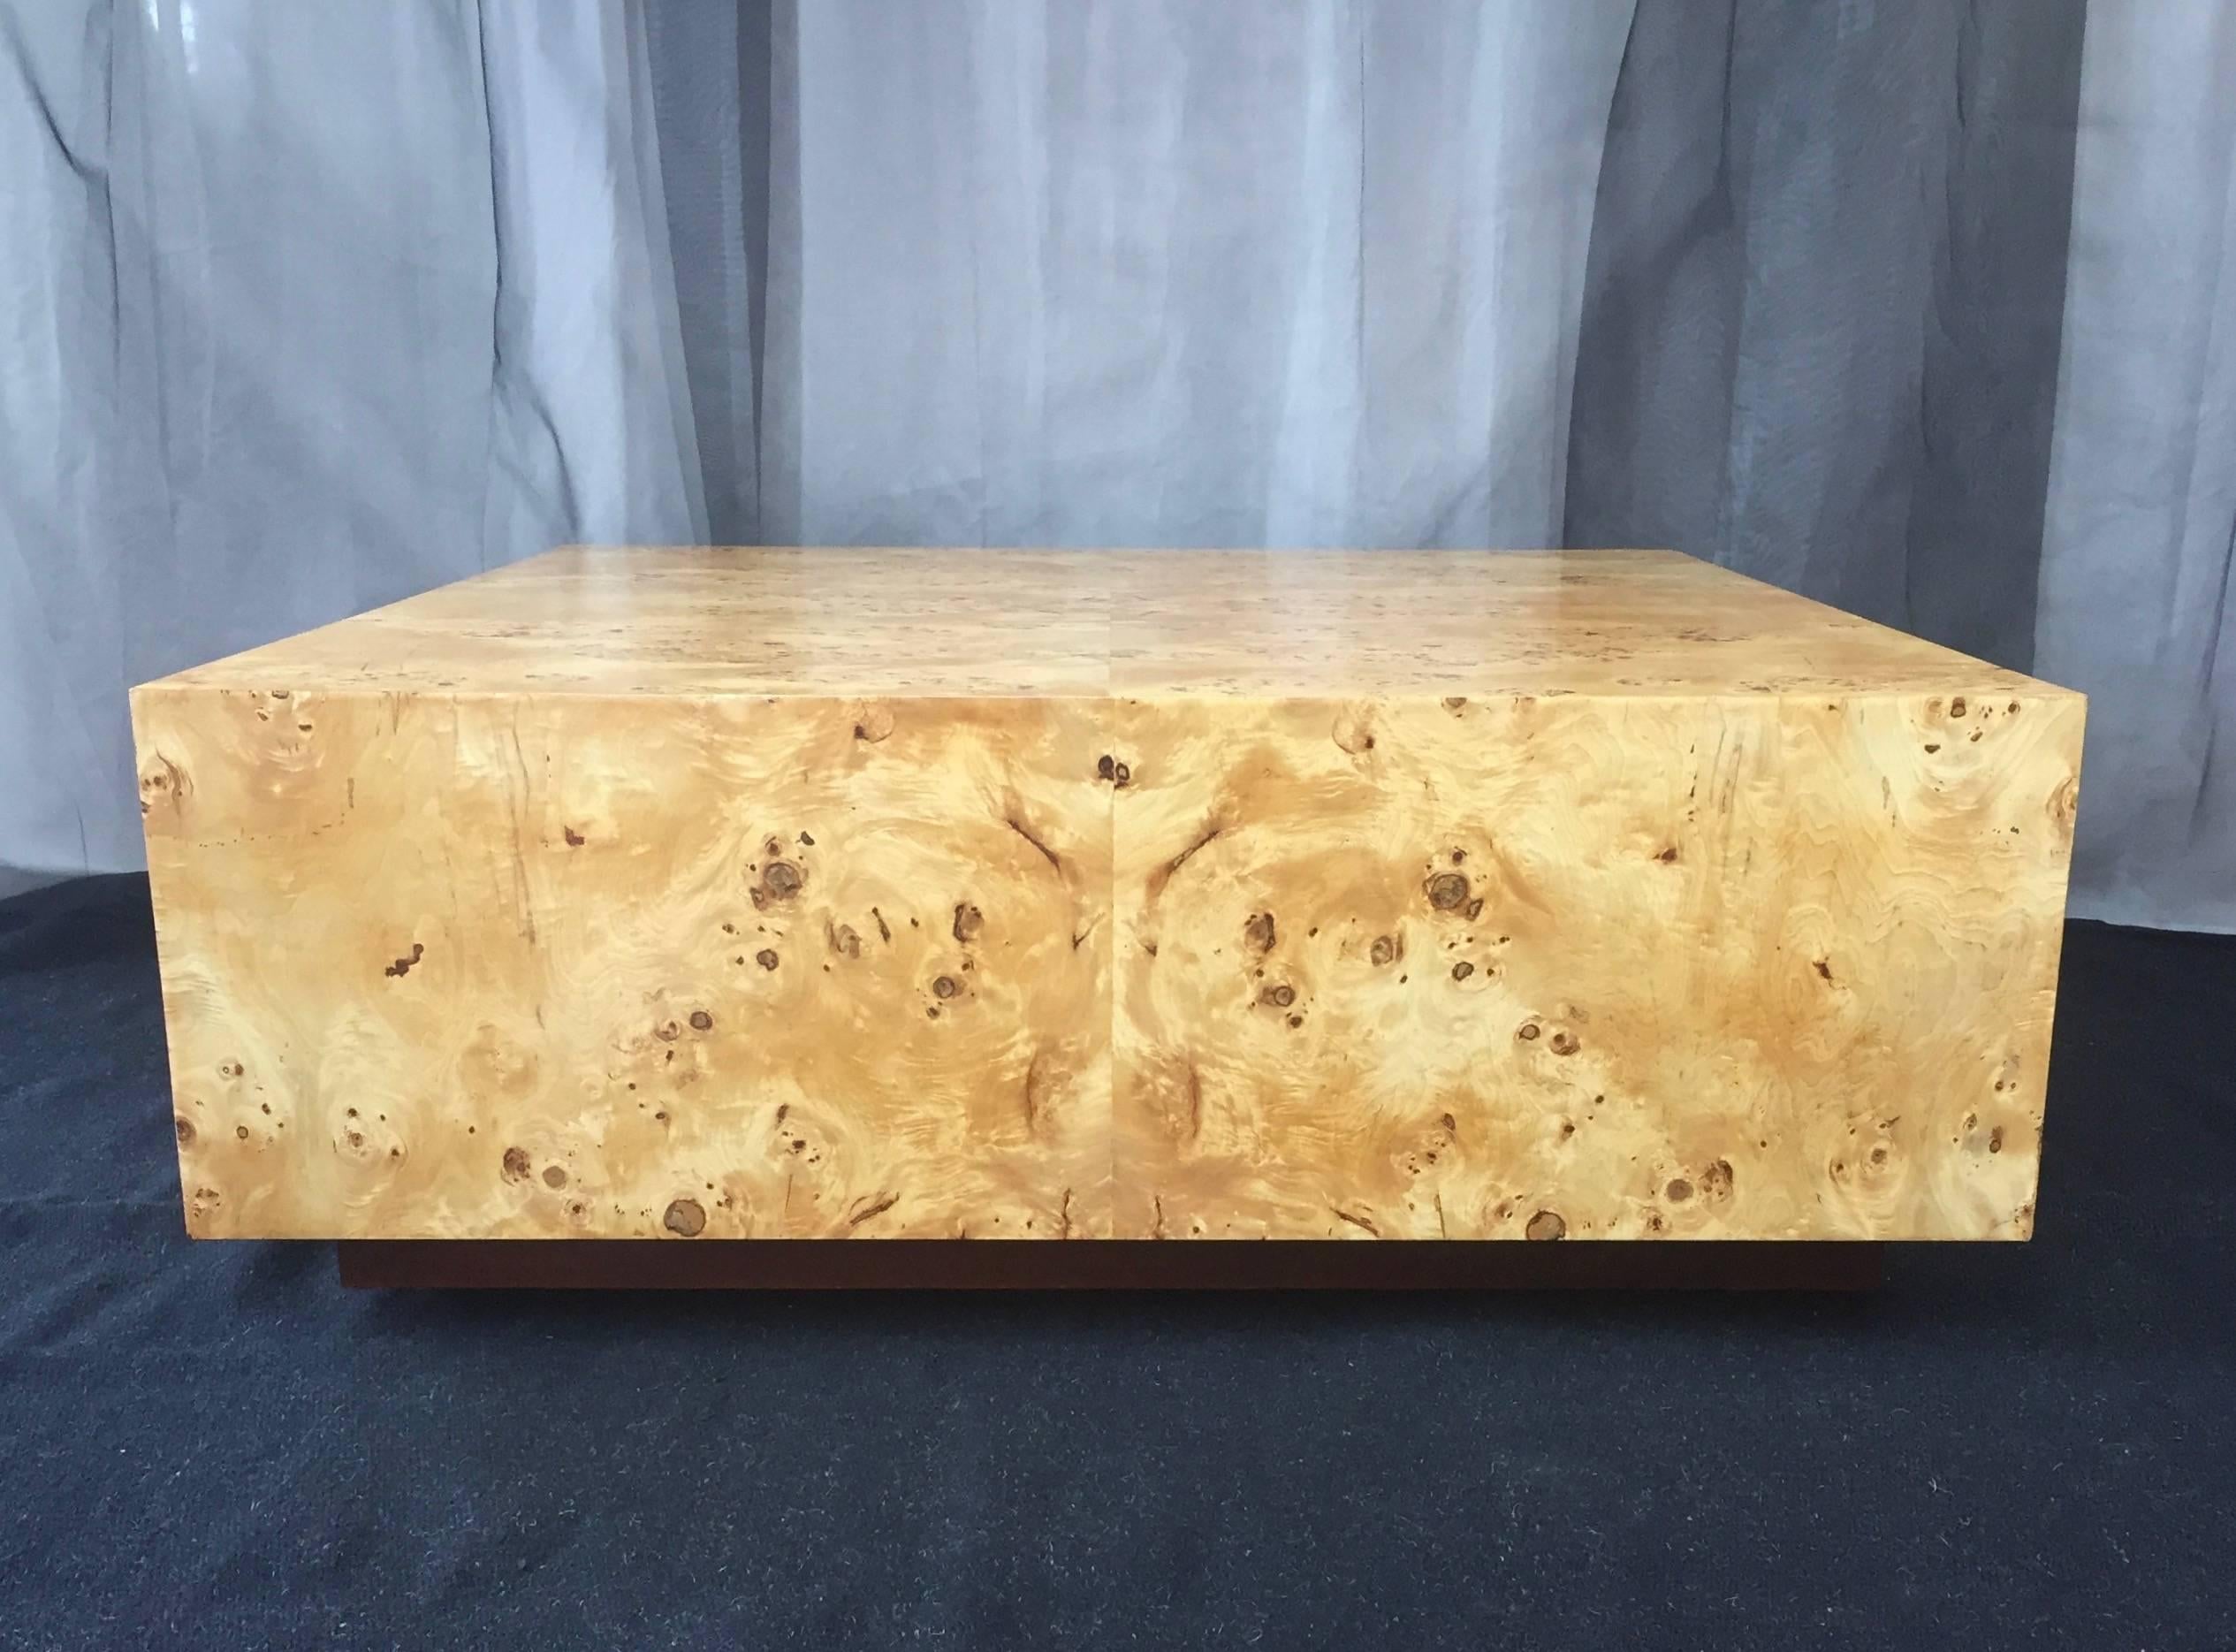 A very substantial square coffee table finished in burl wood and attributed to Milo Baughman.

Simple form showcases shimmering bookmatched Carpathian elm burl veneer. Its exceptionally lively figure evokes a dazzling desert landscape viewed from